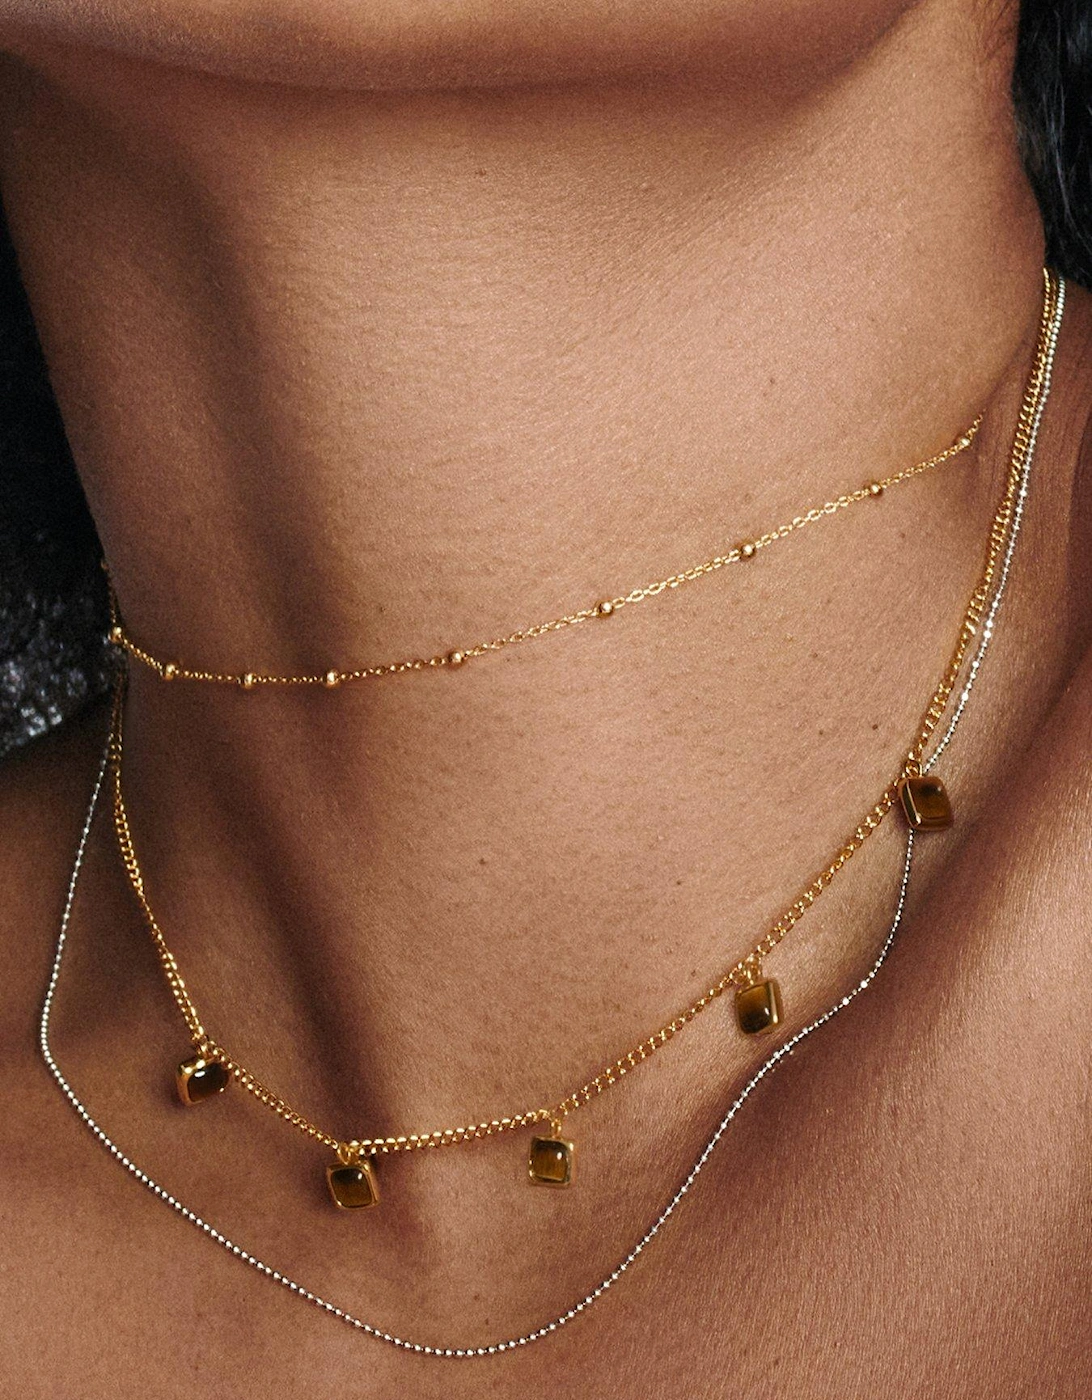 Micro Bead Chain Necklace